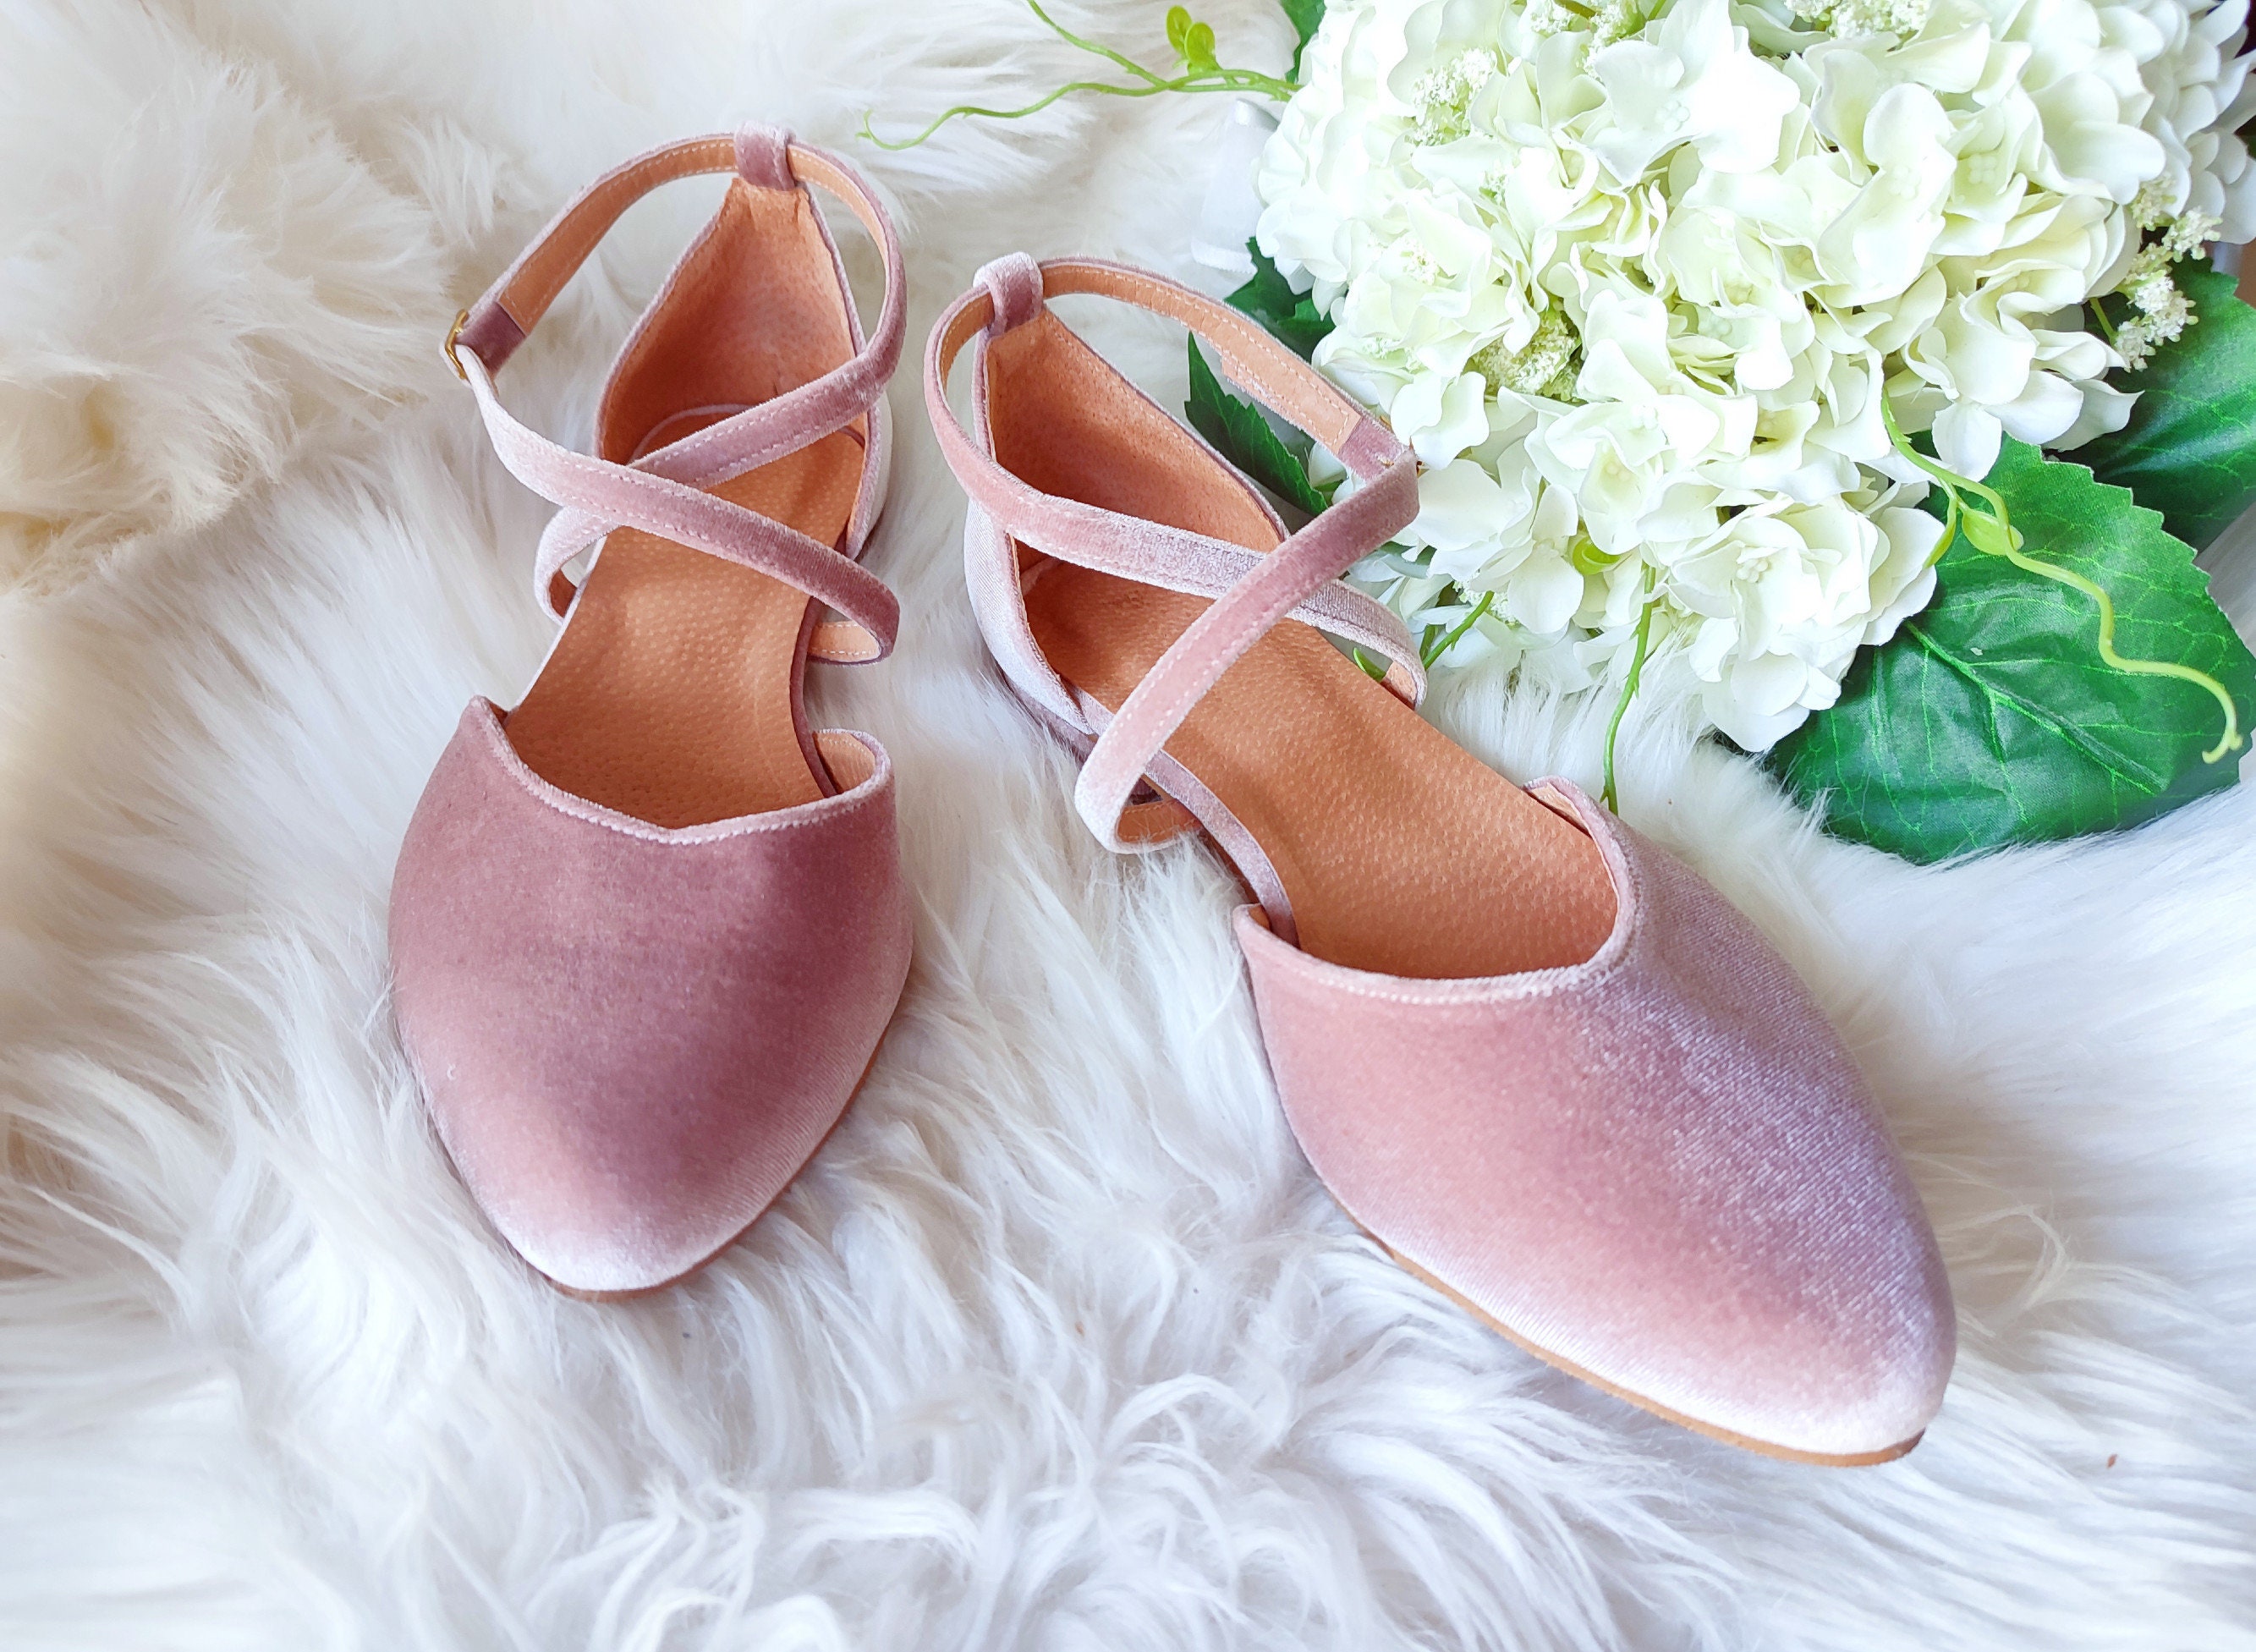 Rose Gold Rock Glitter Flats with Back Satin Bow - Fall Wedding Shoes, Bridesmaids Shoes, Women Wedding Flats, Holiday Shoes